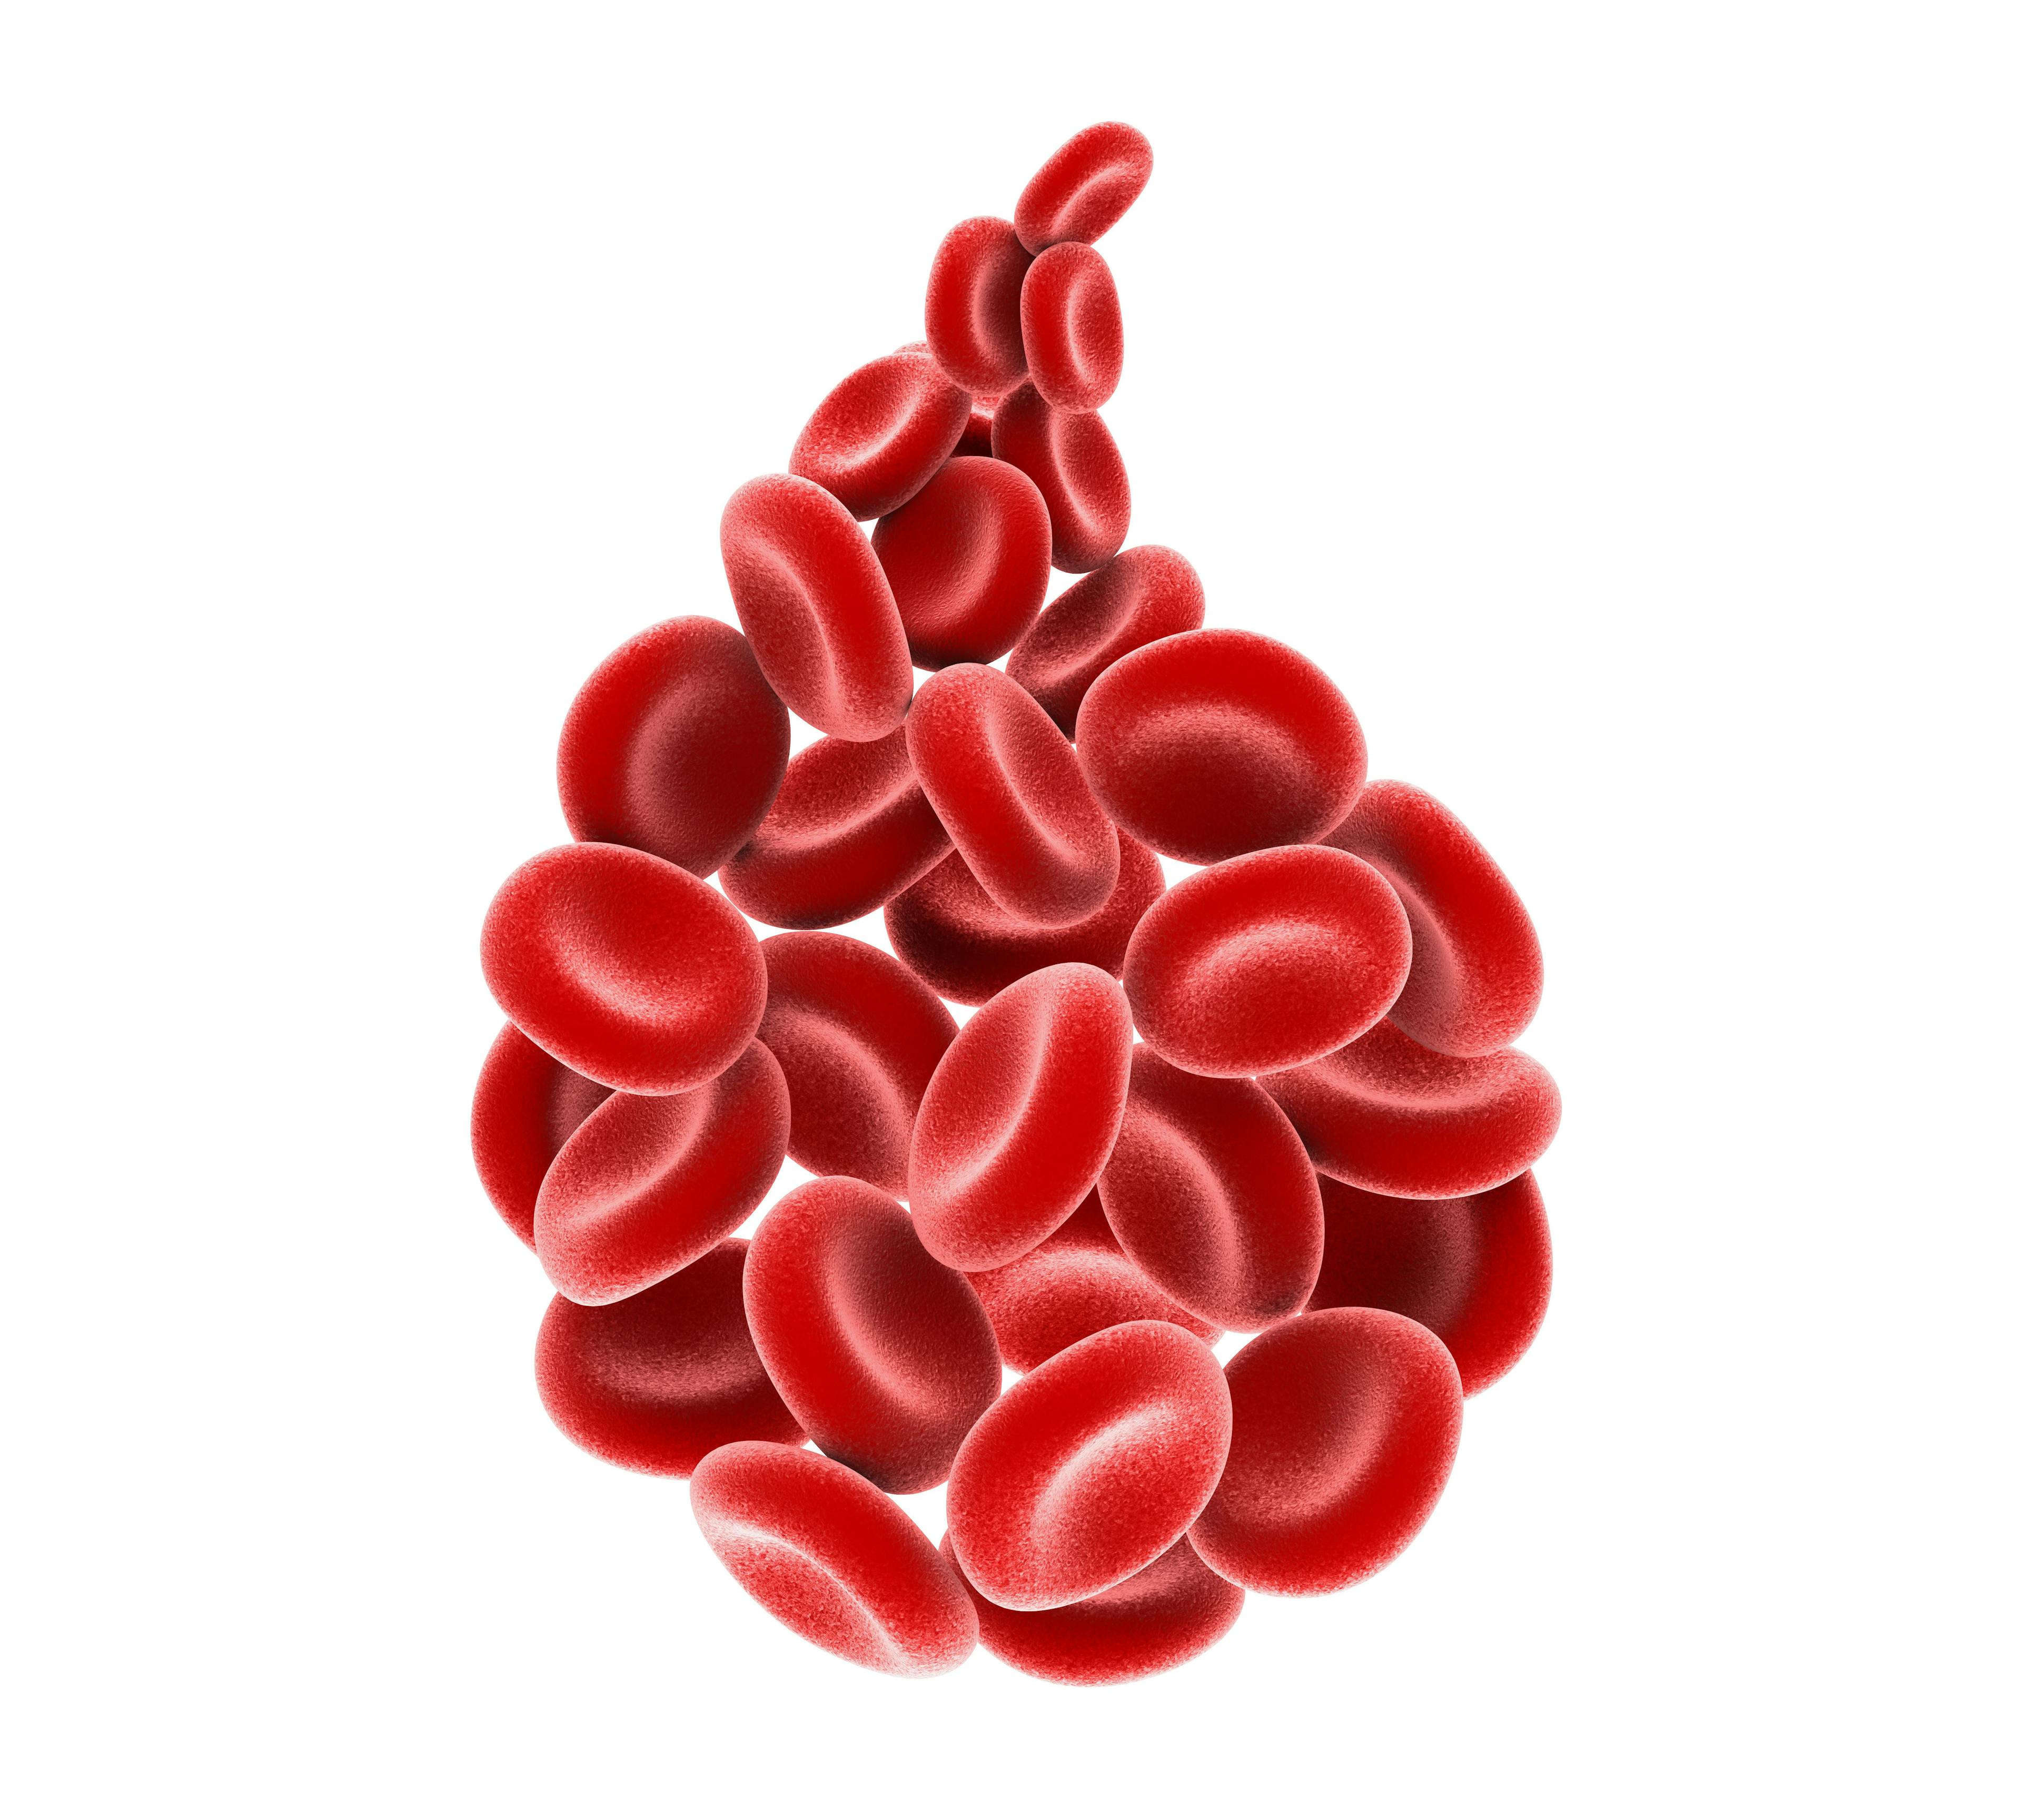 The FDA approved luspatercept as frontline therapy for lower-risk MDS and transfusion-dependent anemia in August 2023.